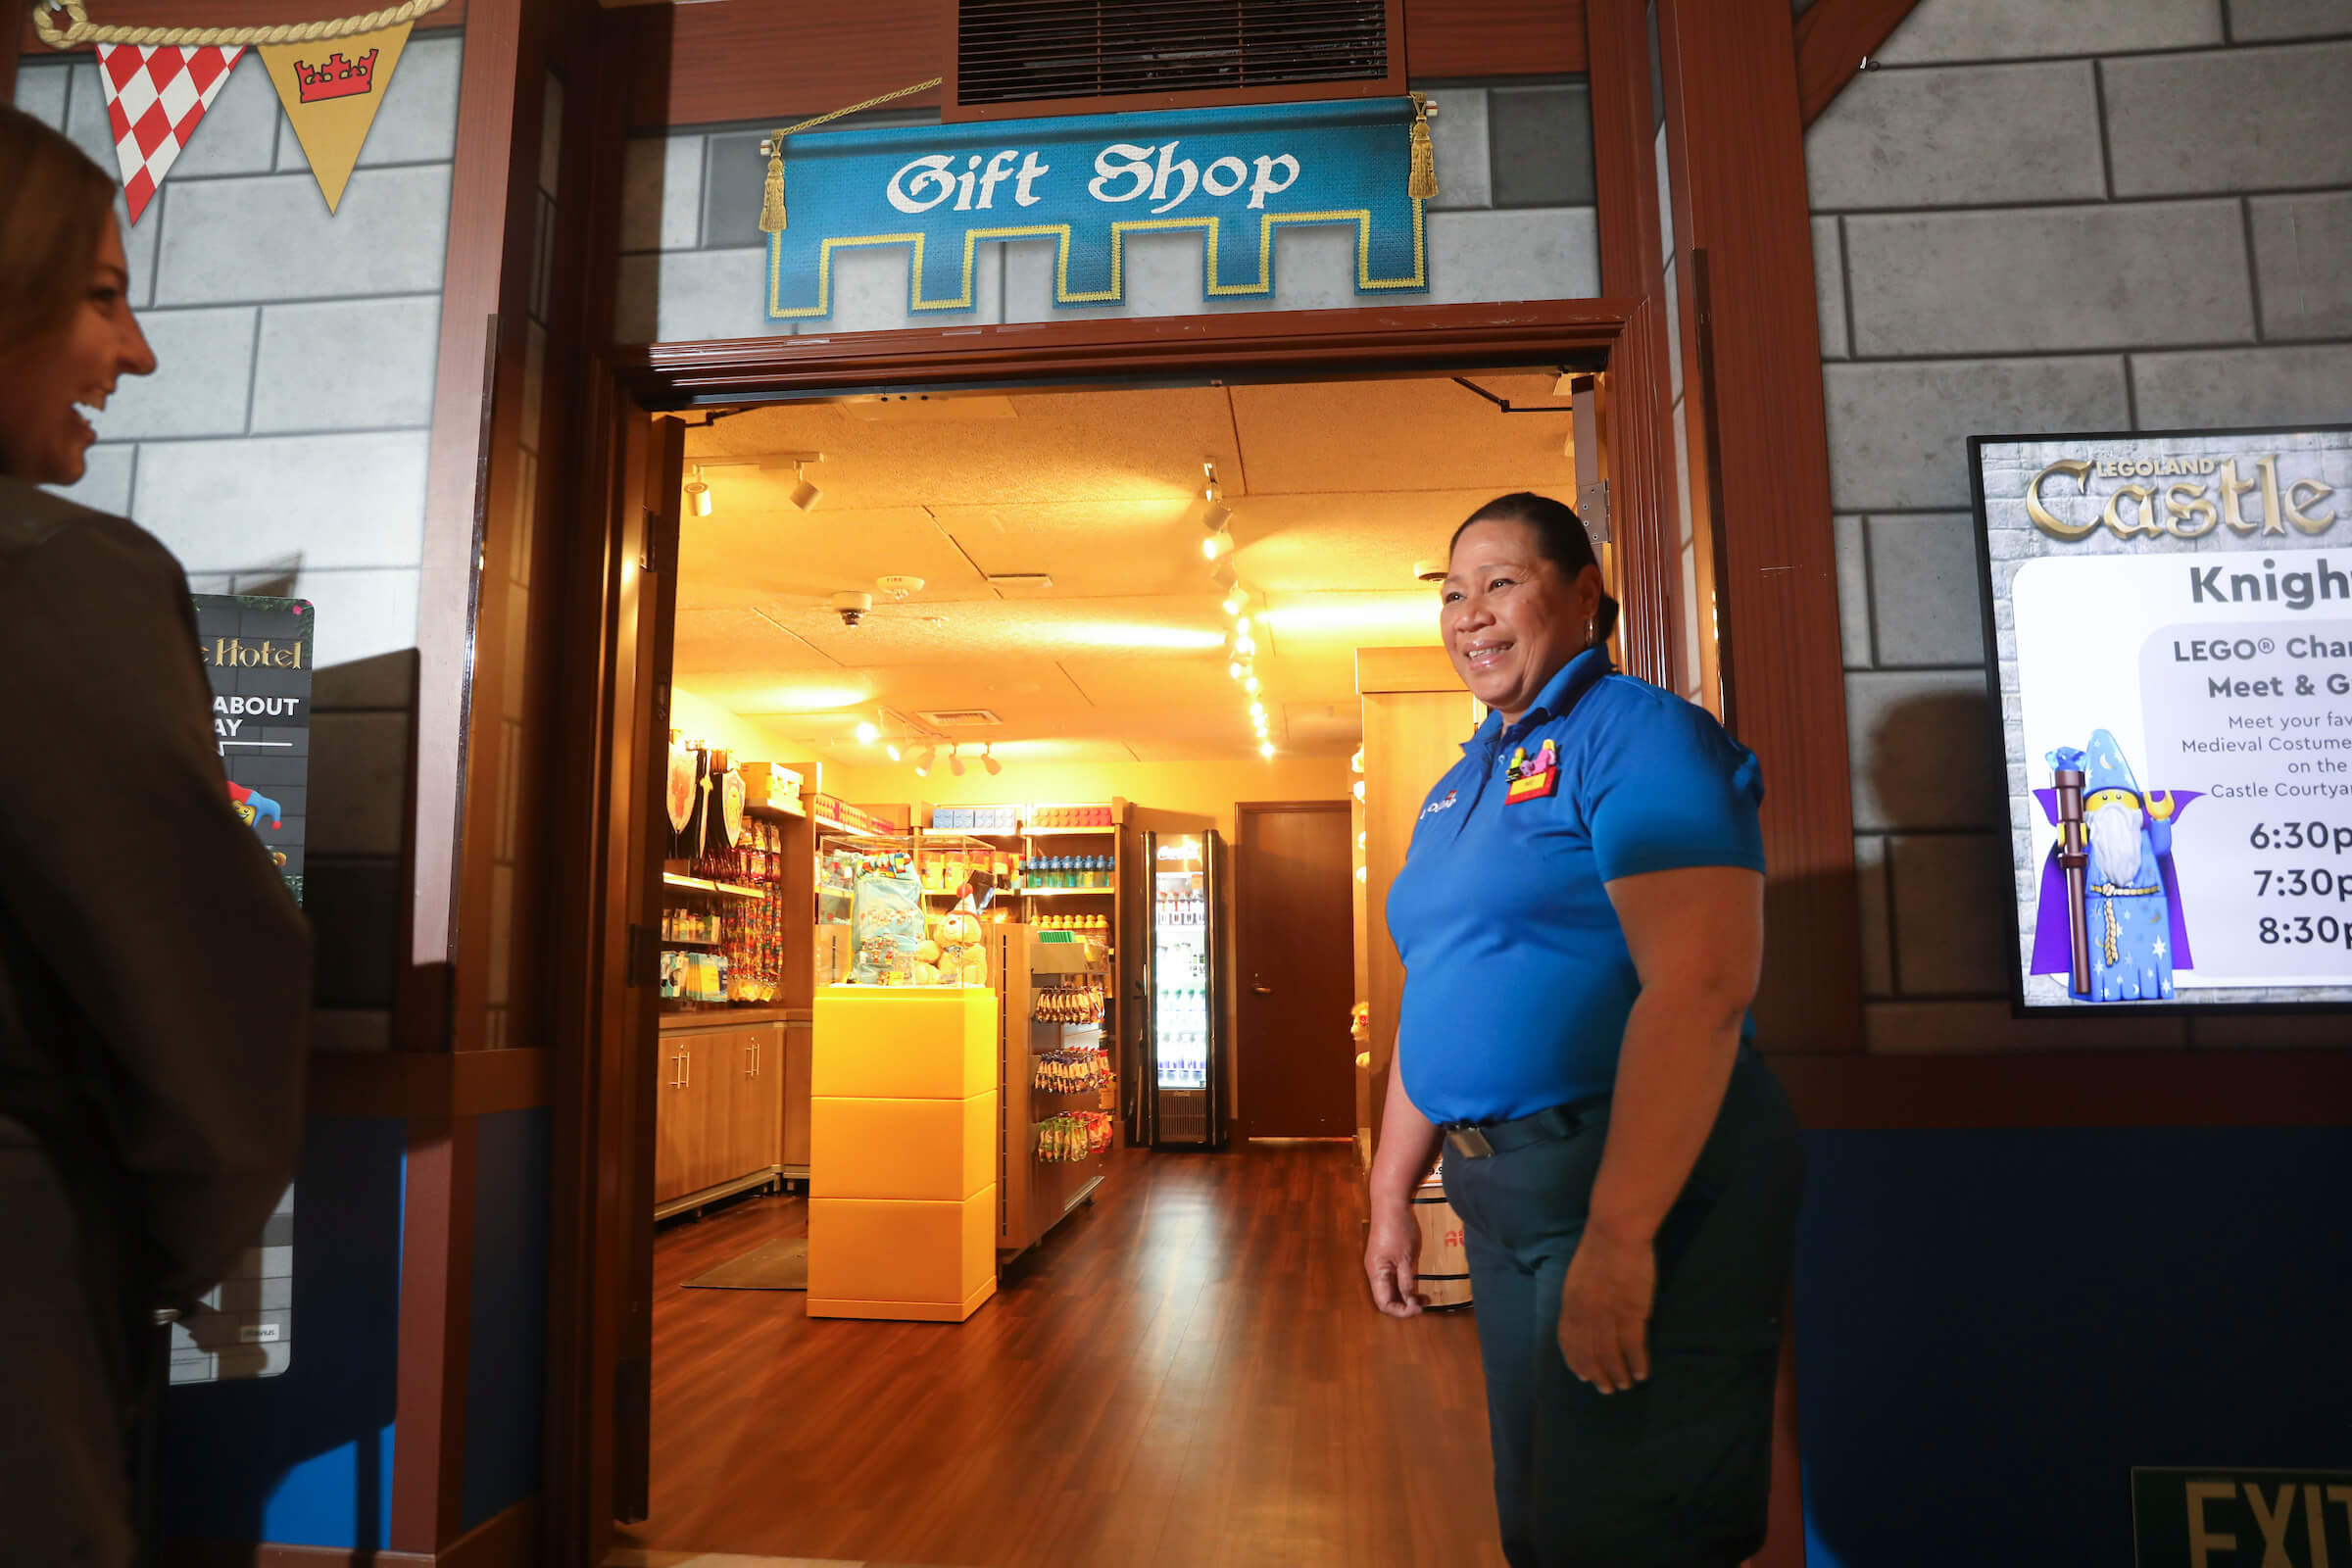 Model Citizen Greets Guests Outside the Castle Hotel Gift Shop